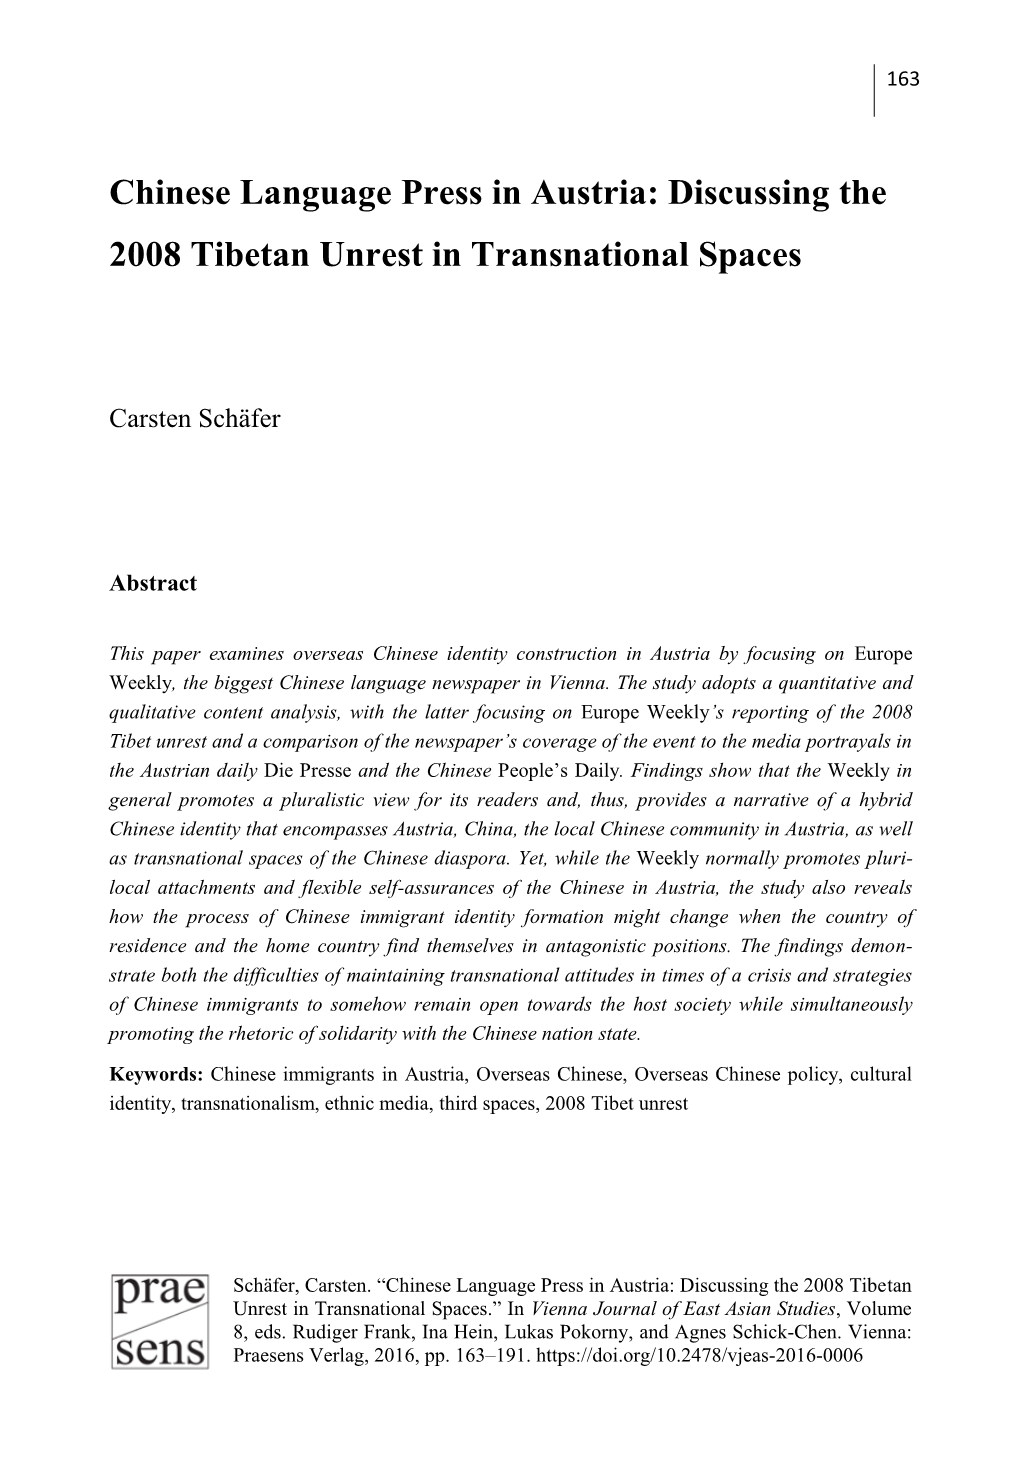 Discussing the 2008 Tibetan Unrest in Transnational Spaces